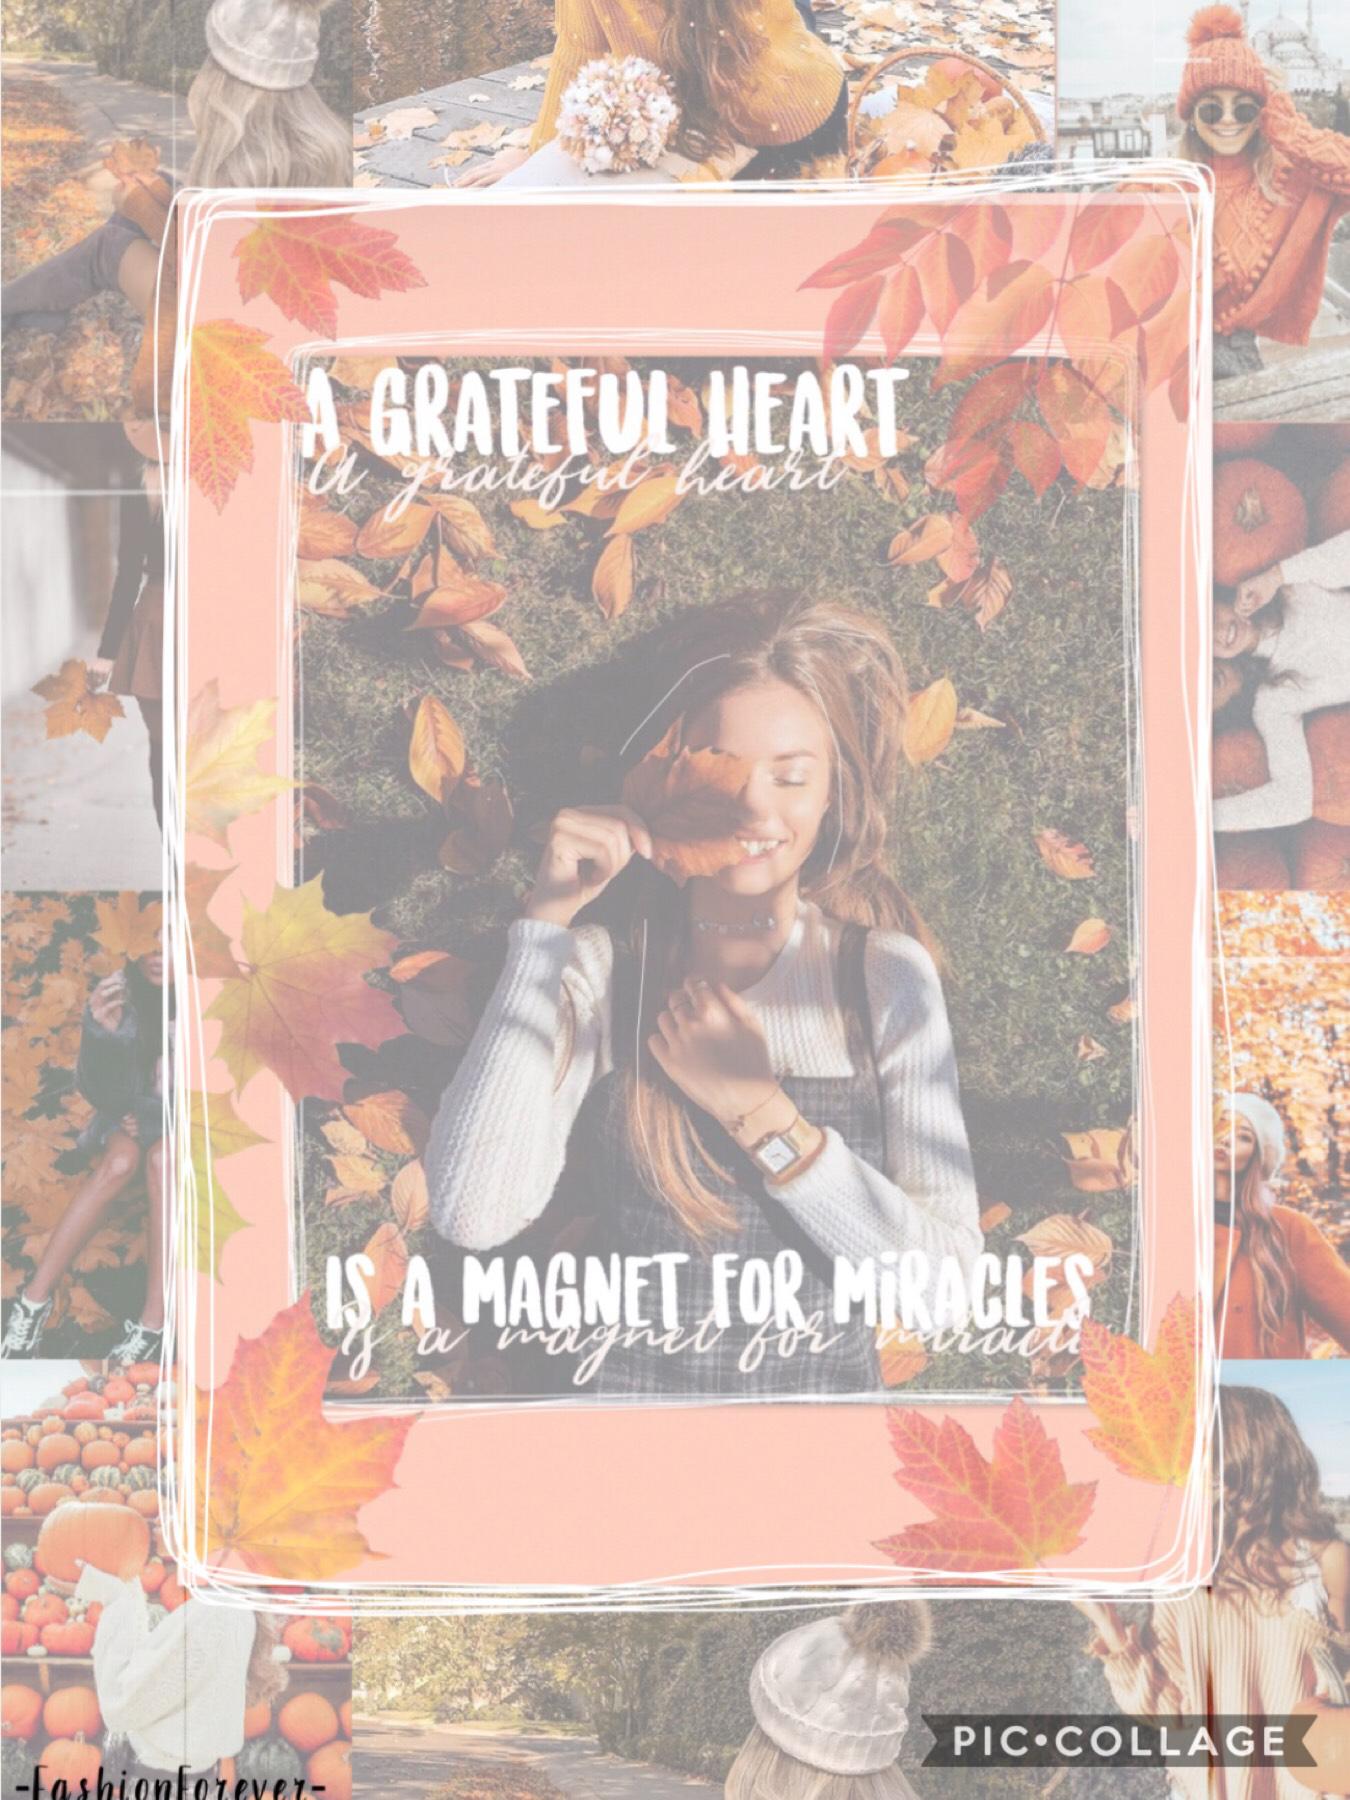 🍂🍁11-21-18🍂🍁
Hey gorgeous!
I used this for a contest. Rate /10?
Q// What’s ur favorite thing about Thanksgiving?
A// The gathering of my friends and fam! Honestly, it’s the only time we sit down as a family🙃